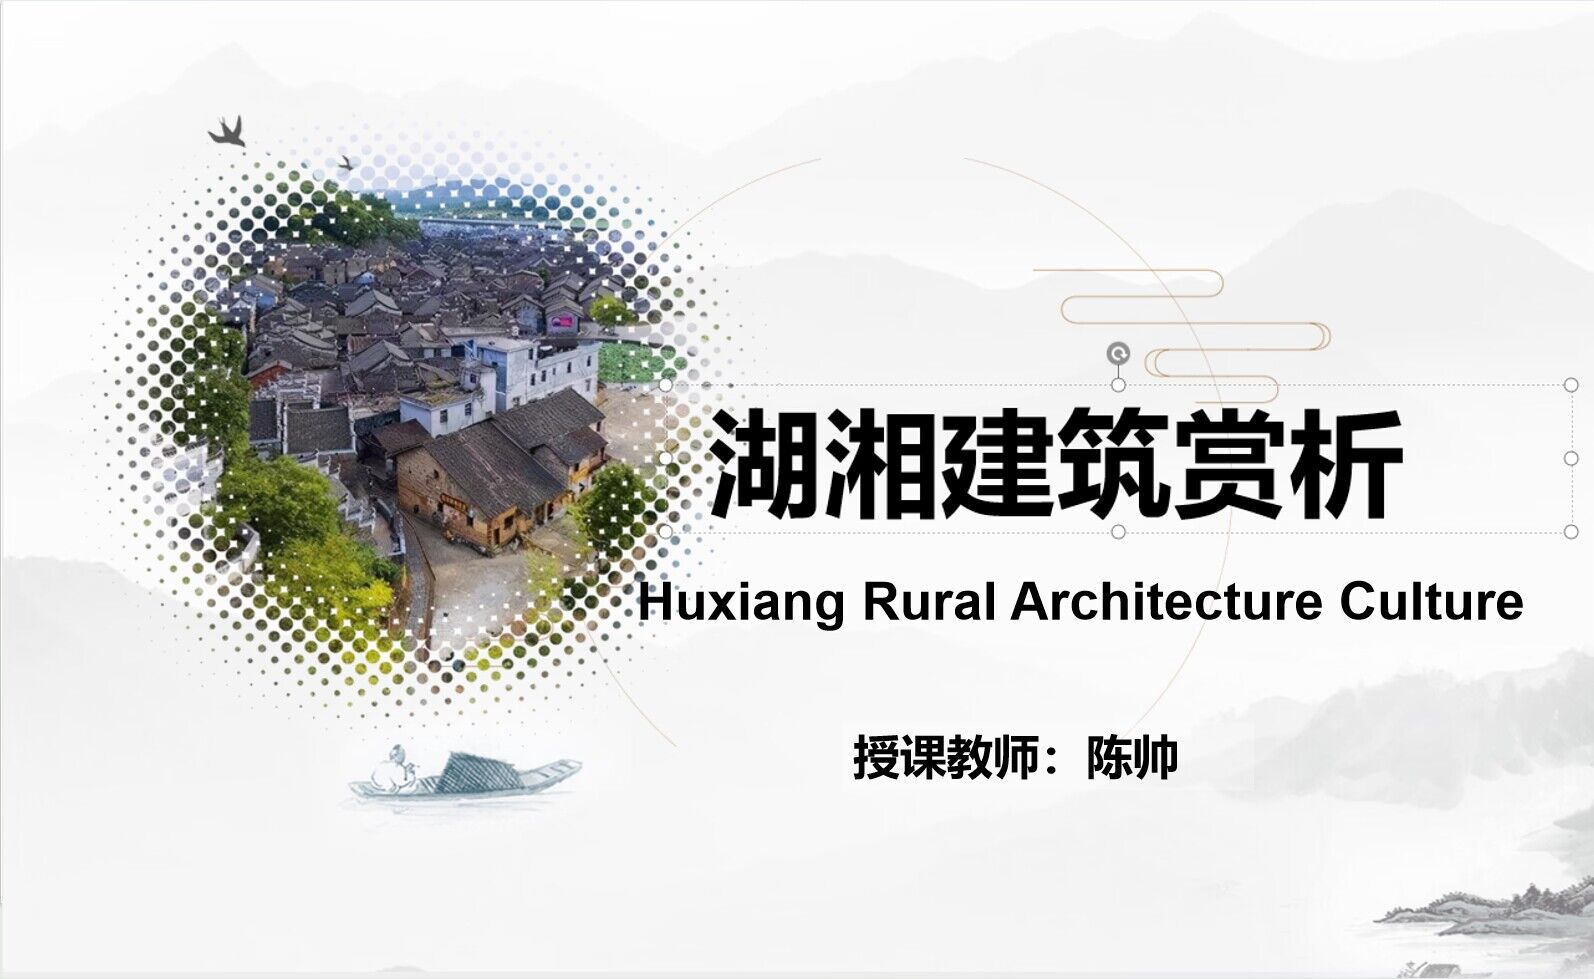 Huxiang Rural Architecture Culture